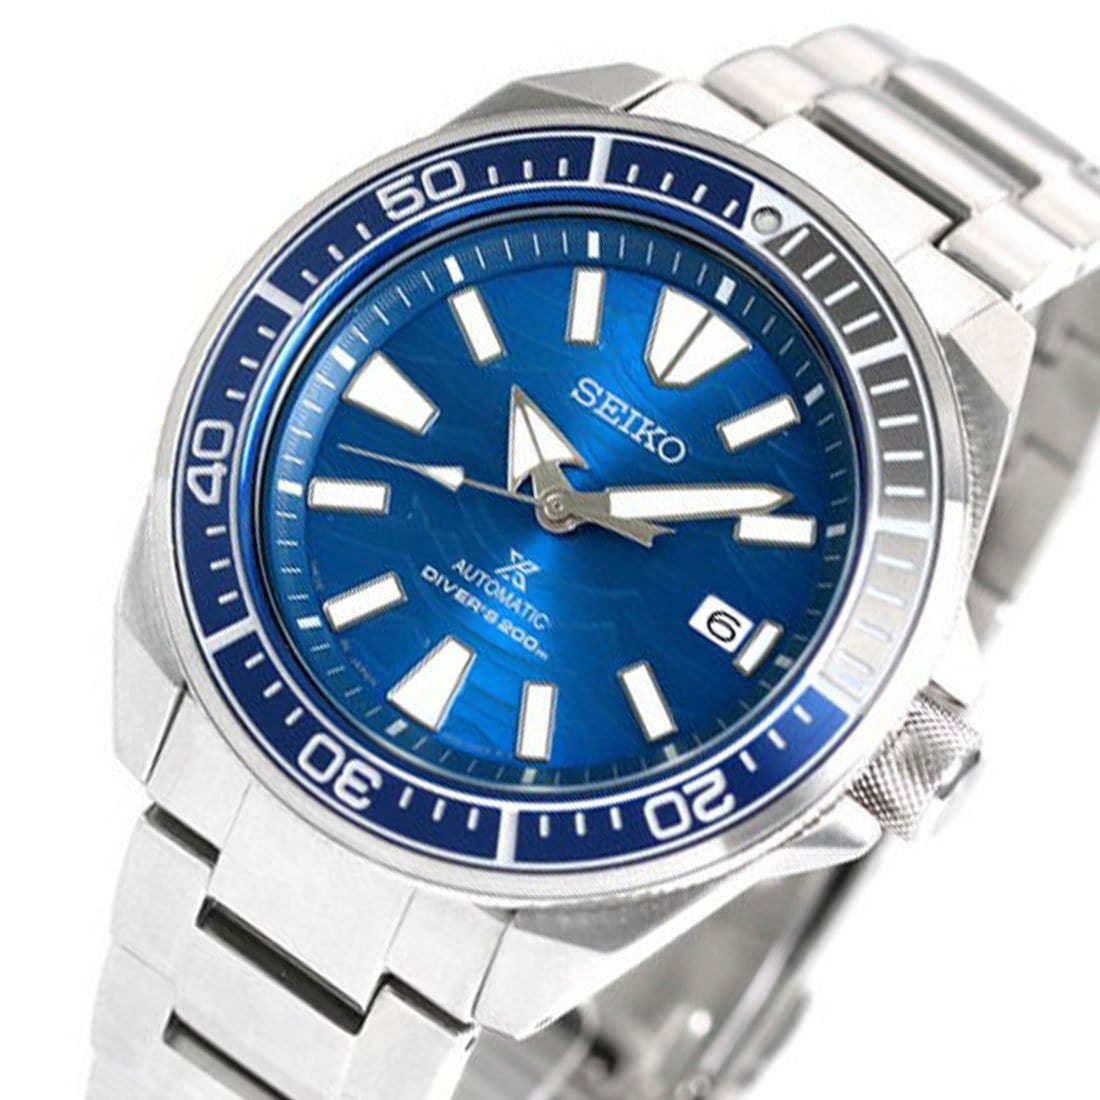 Seiko Prospex Save the Ocean Watch SBDY029